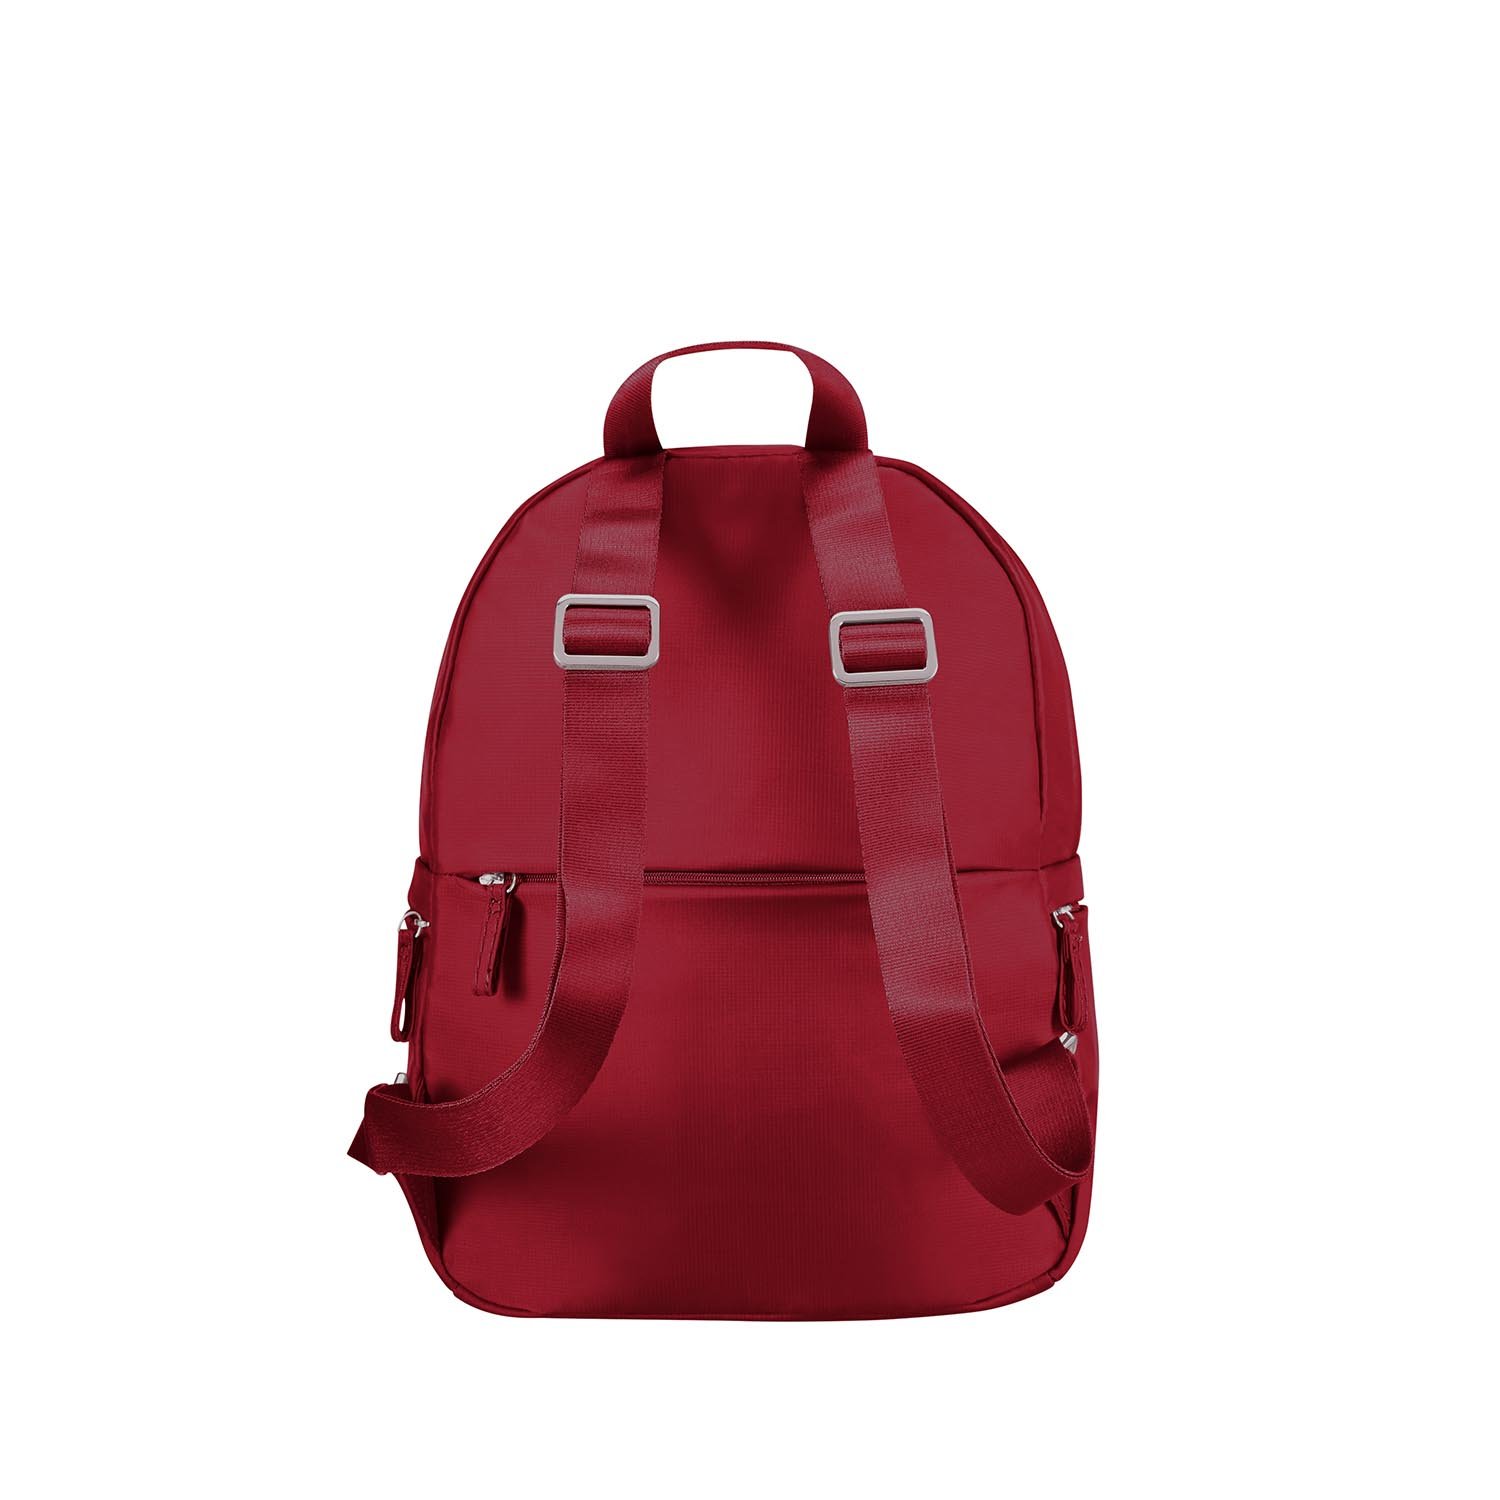 MOVE 2.0-BACKPACK S88D-024-SF000*60